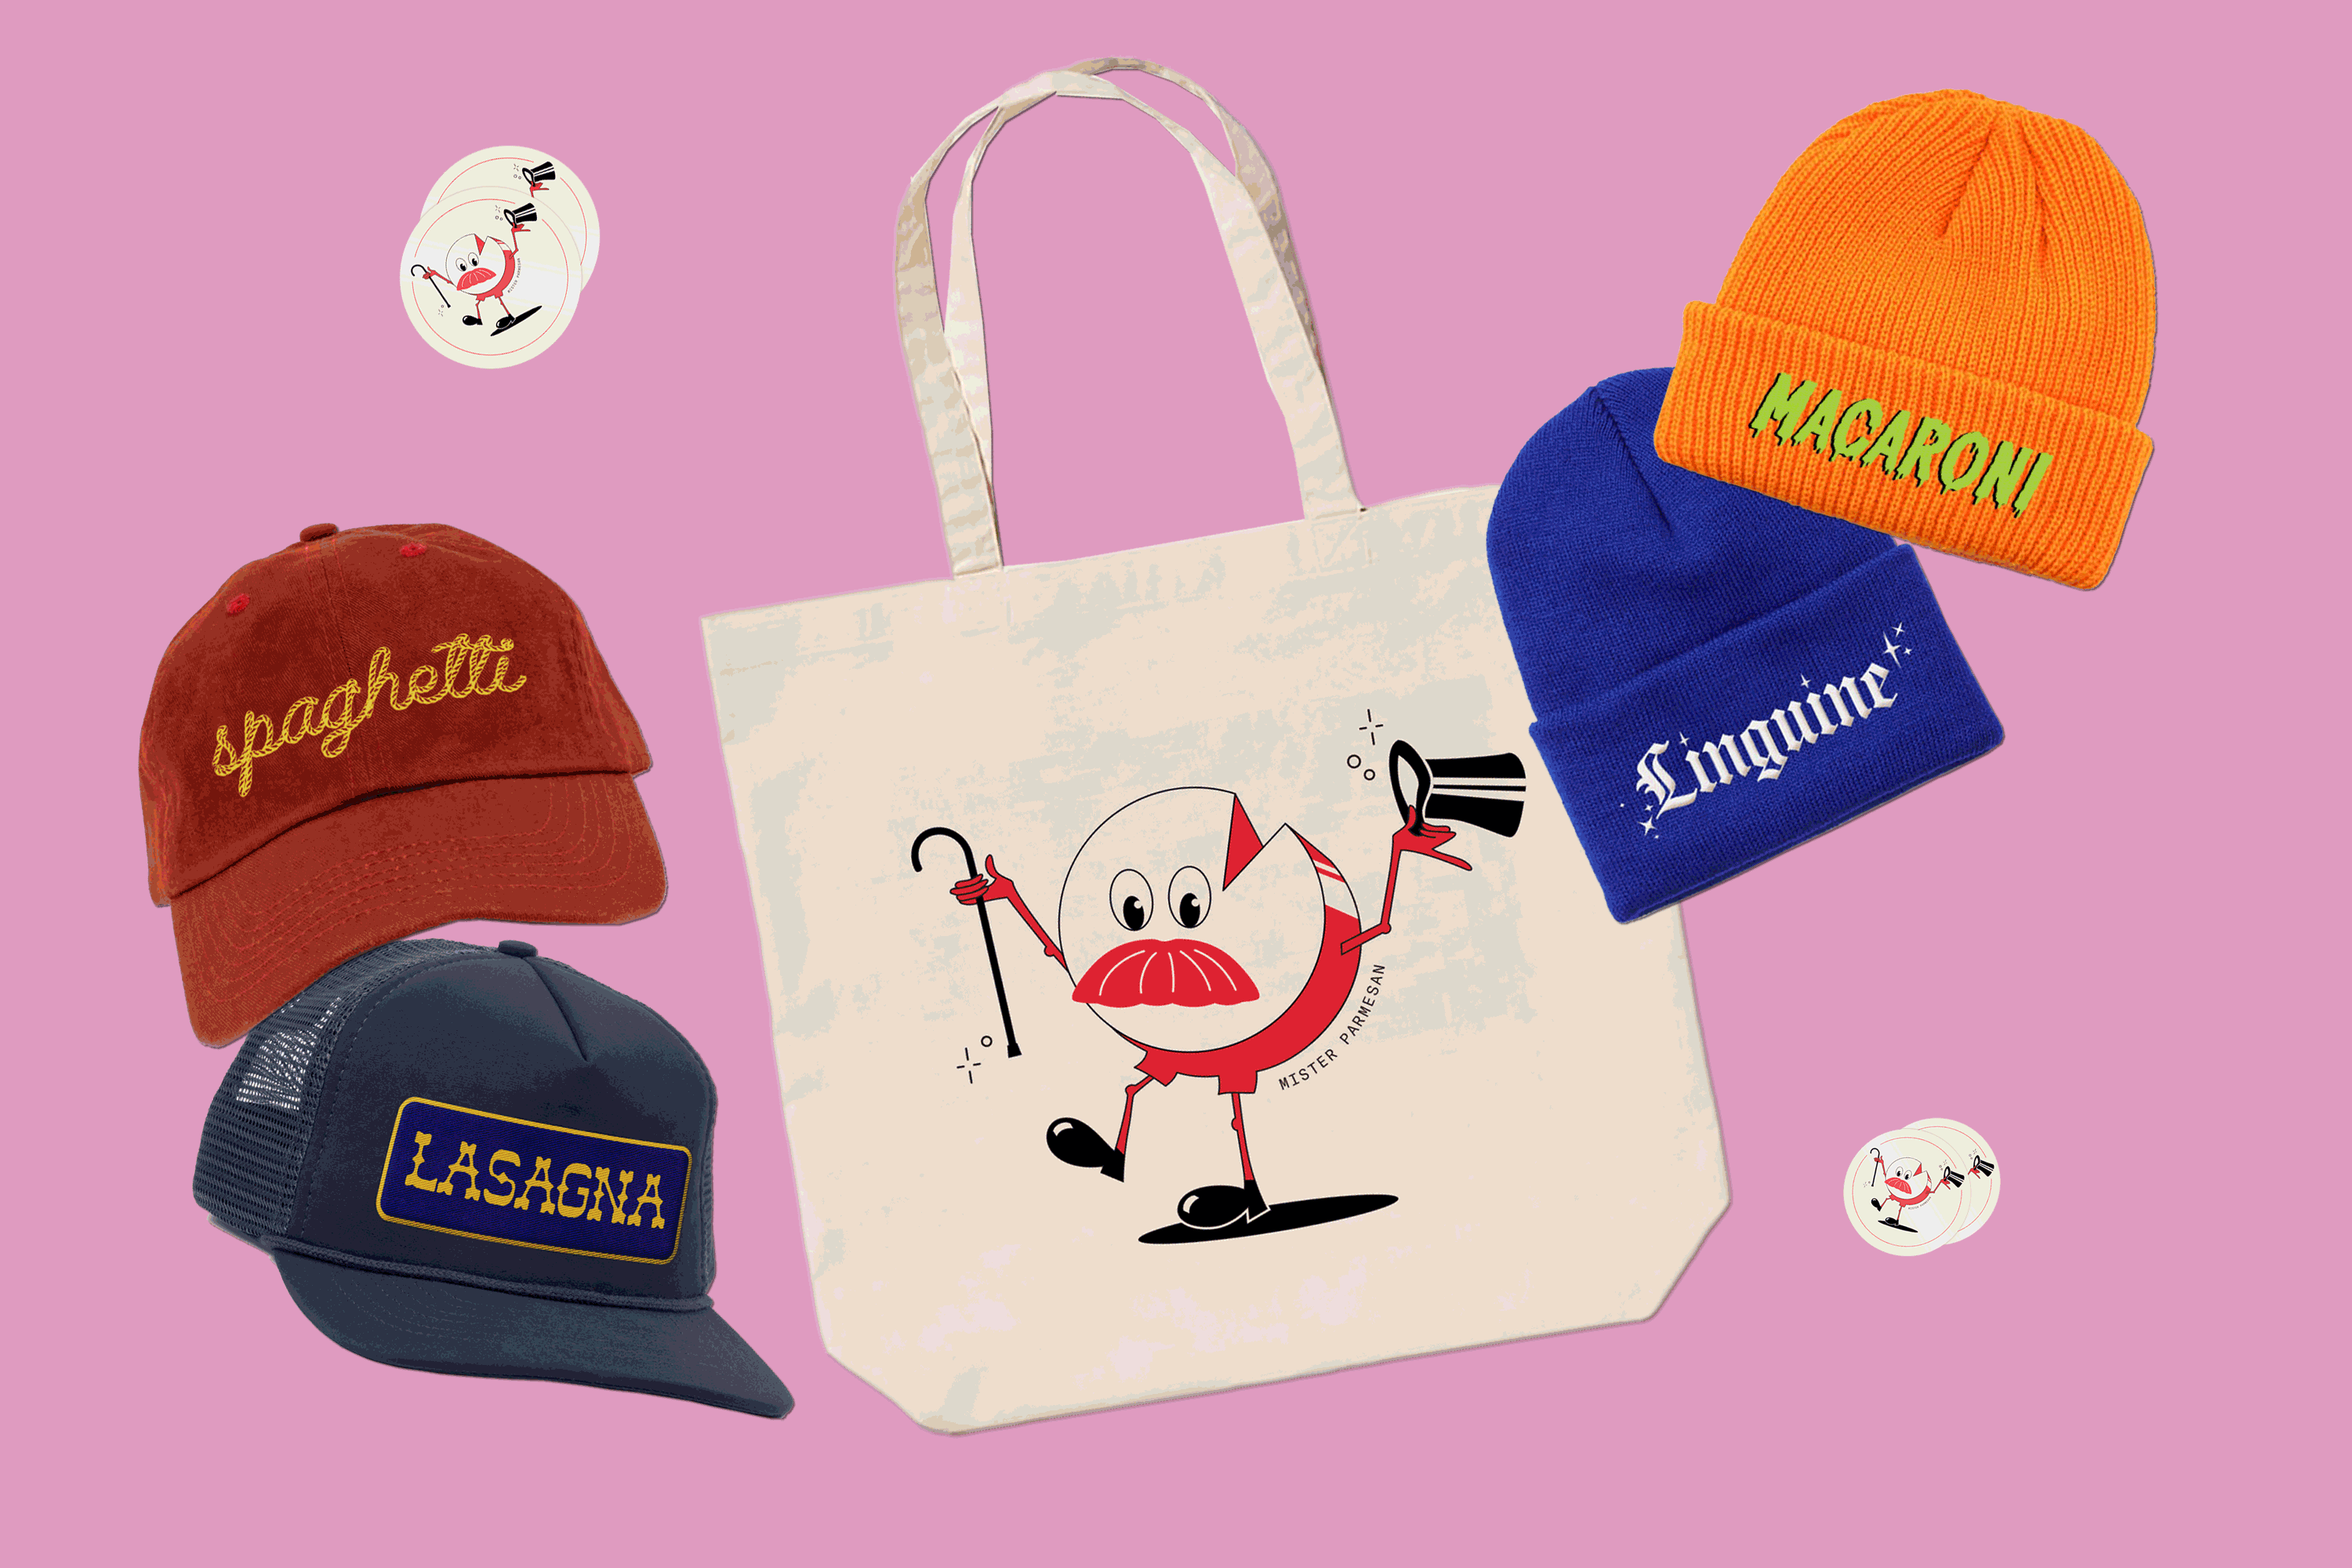 Mister Parmesan has some primo merch for all you pasta lovers, including hats, stickers, totes and more.